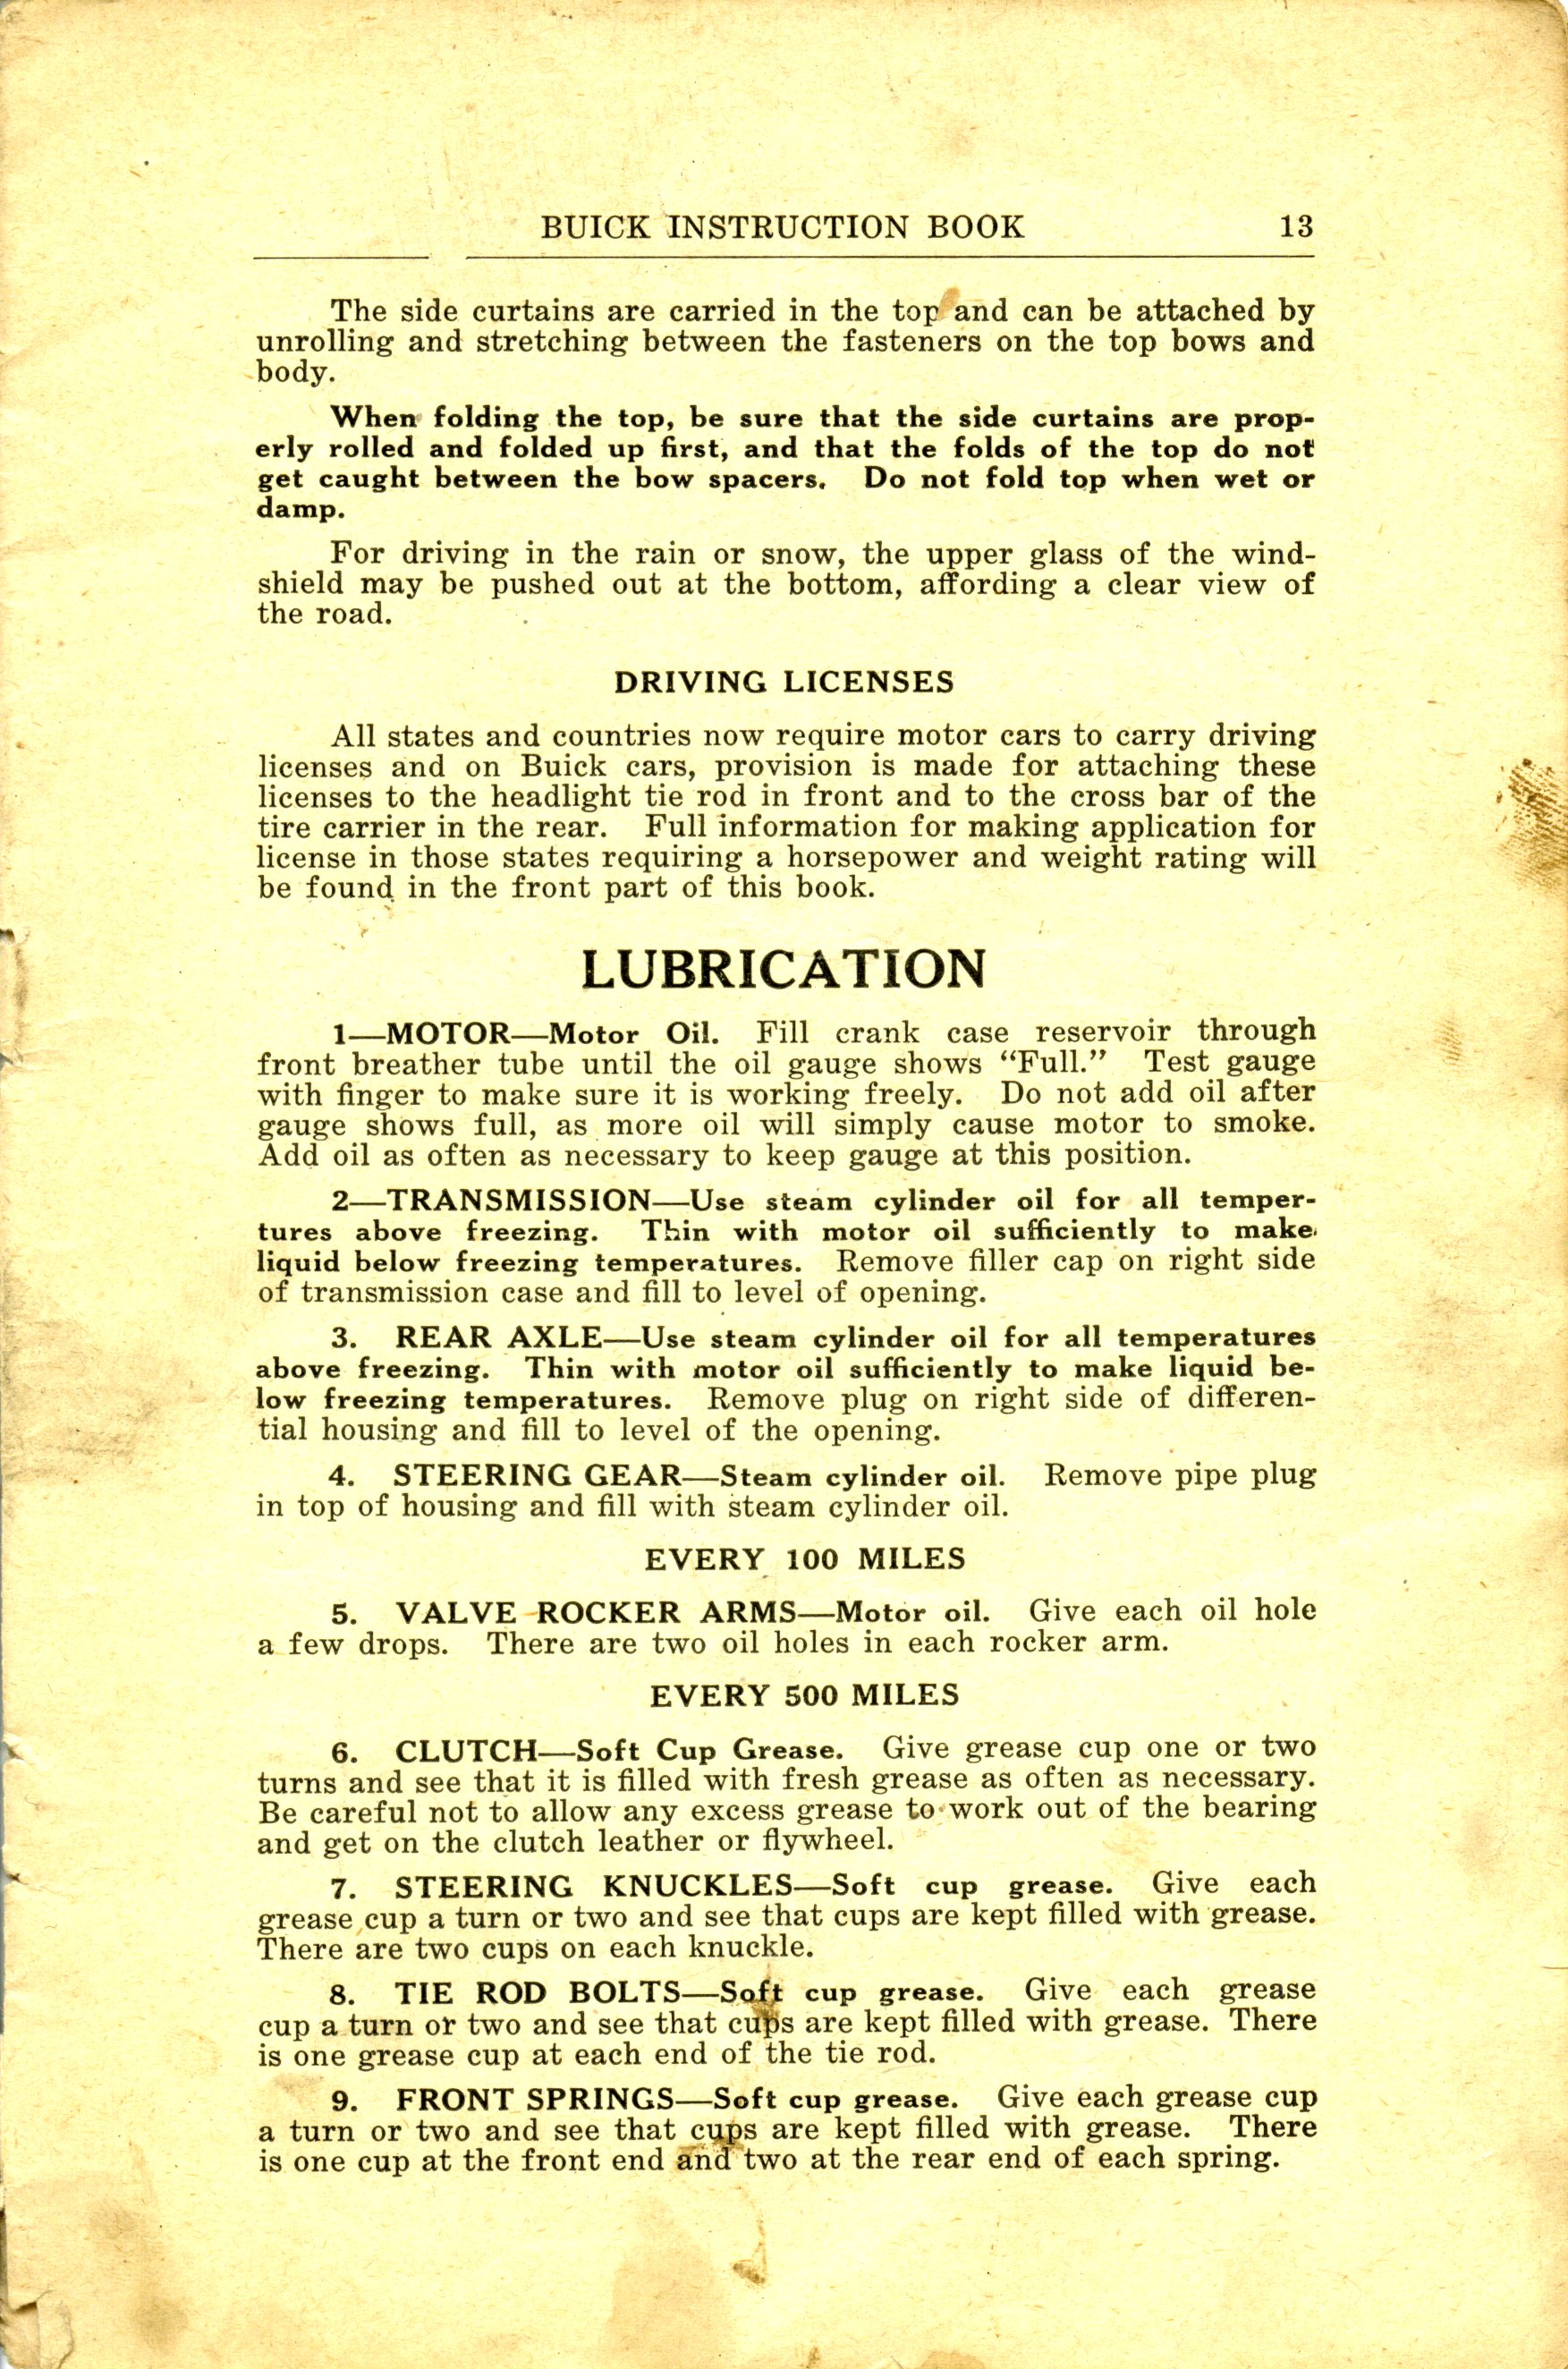 1918 Buick Instruction Book-4 Cyl-13